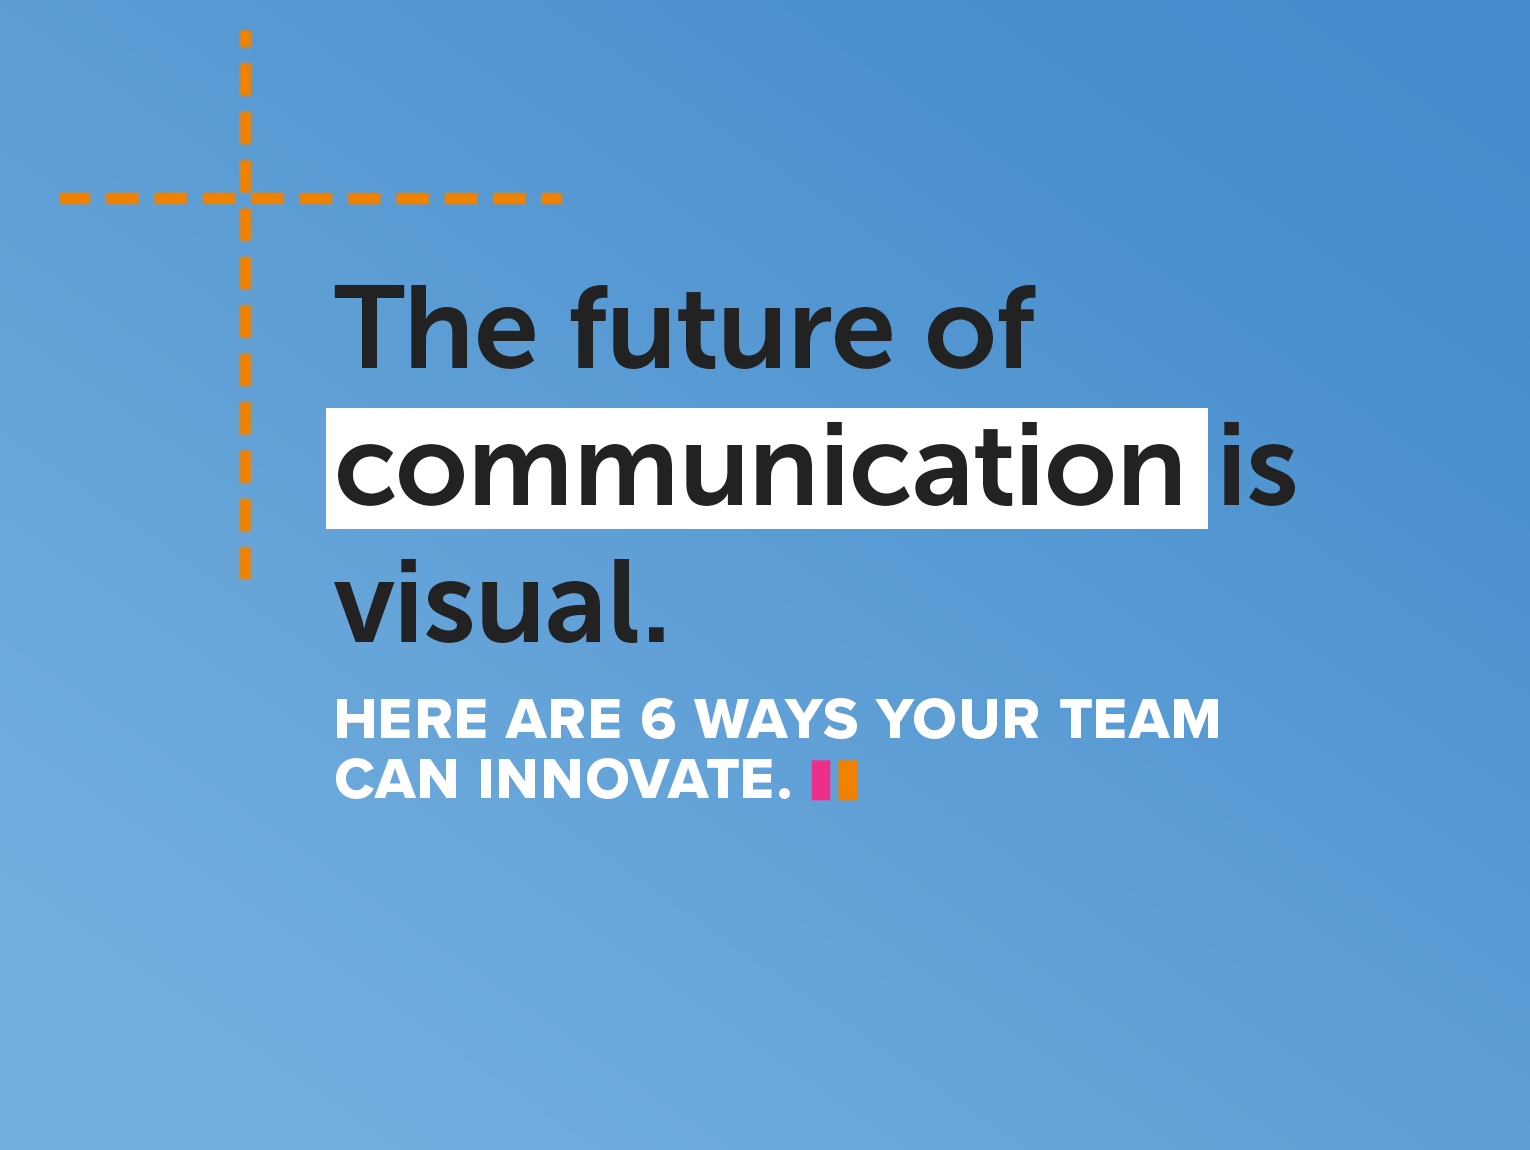 The Future of Communication Is Visual. Here Are 6 Ways Your Team Can Innovate.